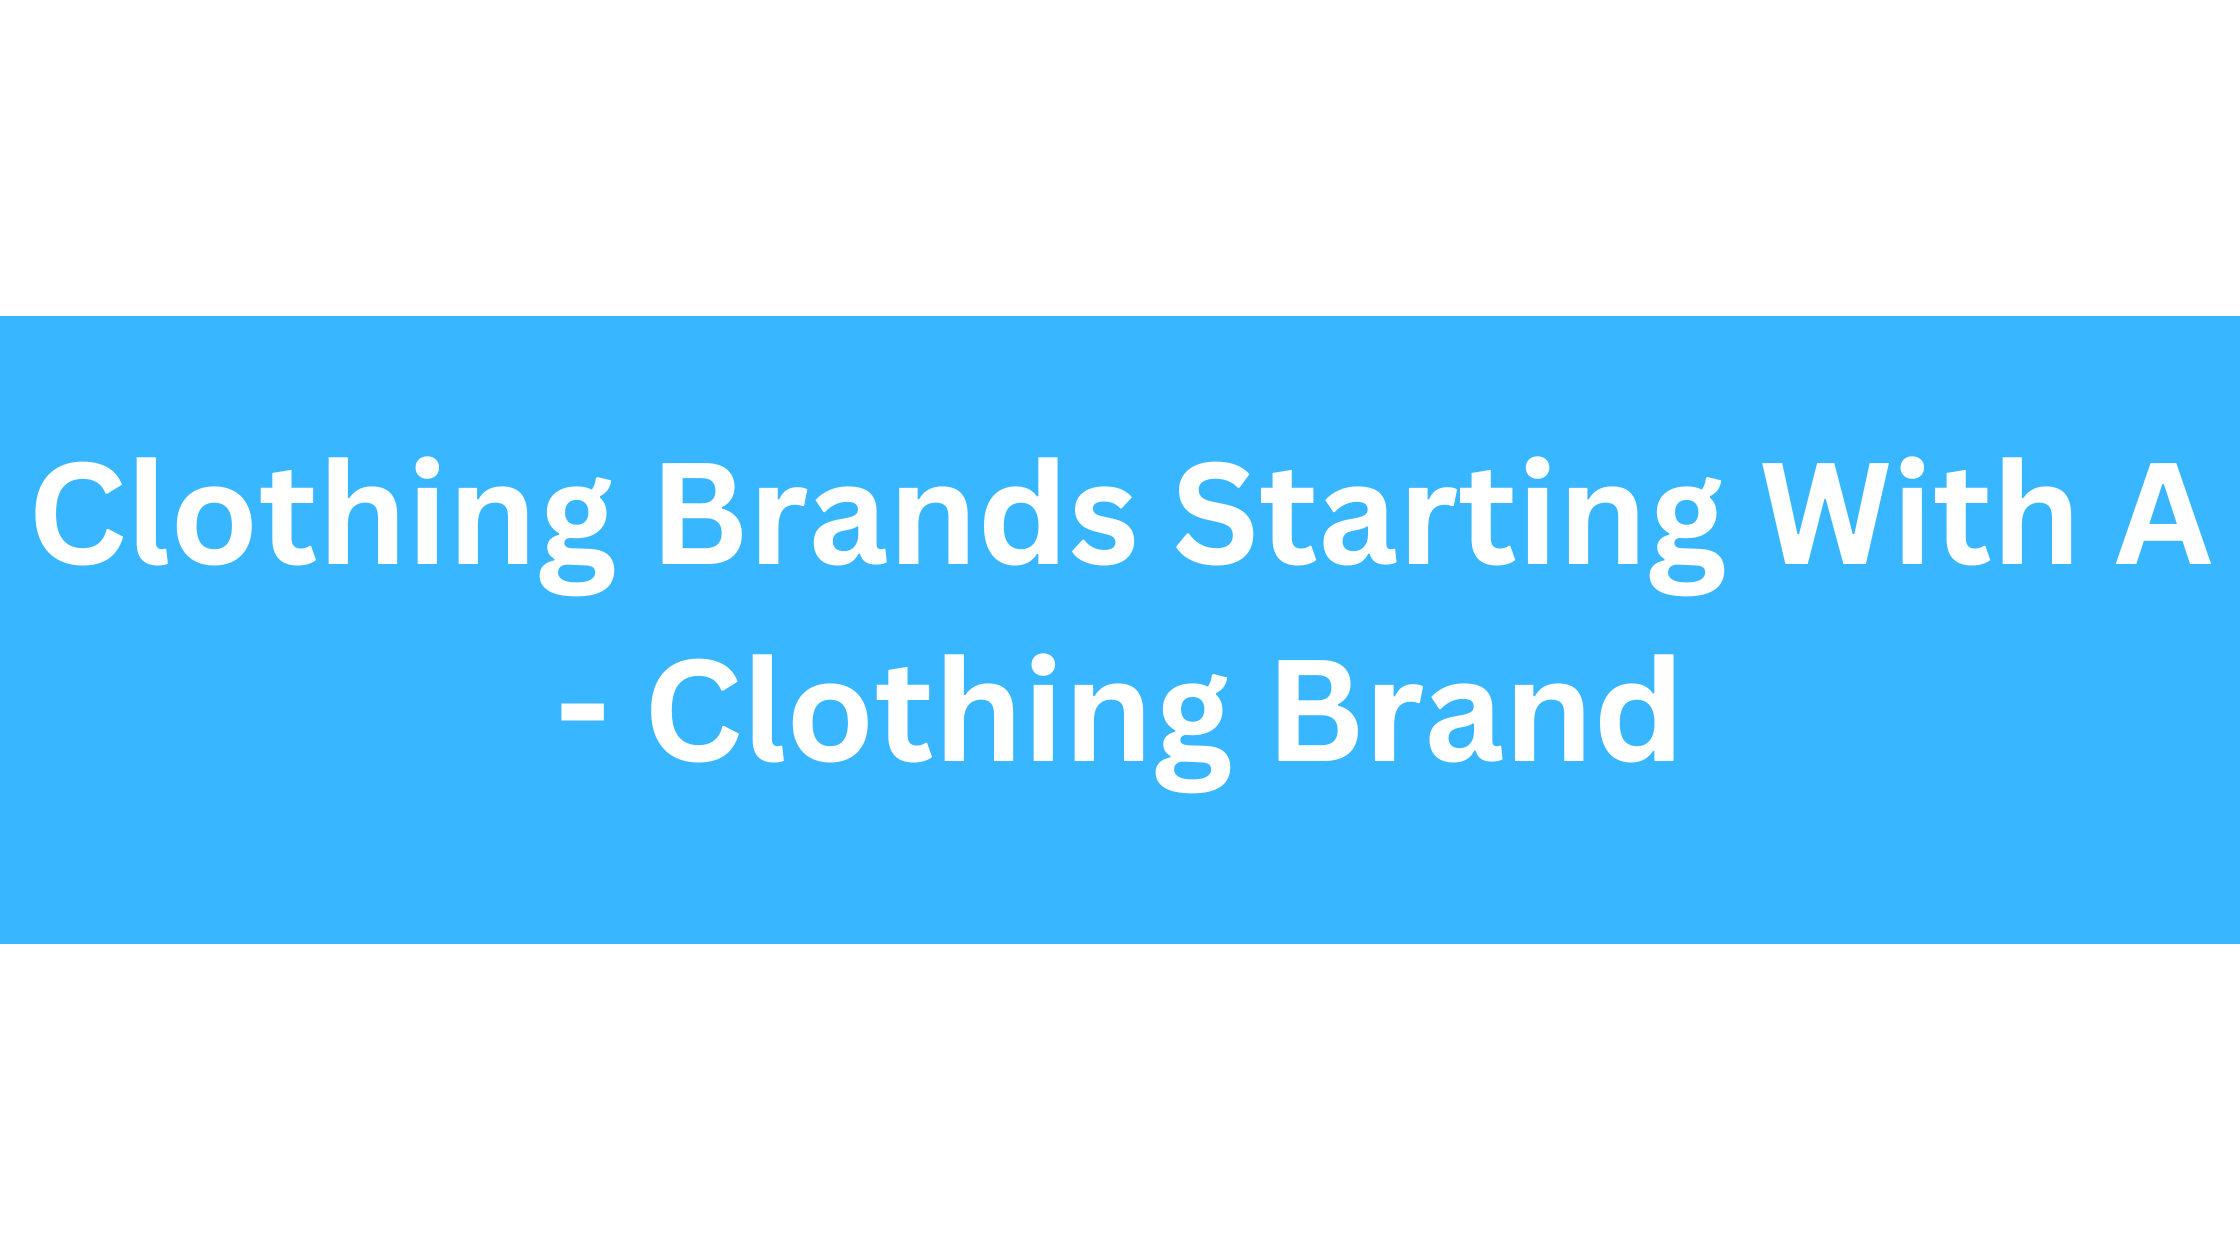 Clothing Brands Starting With A